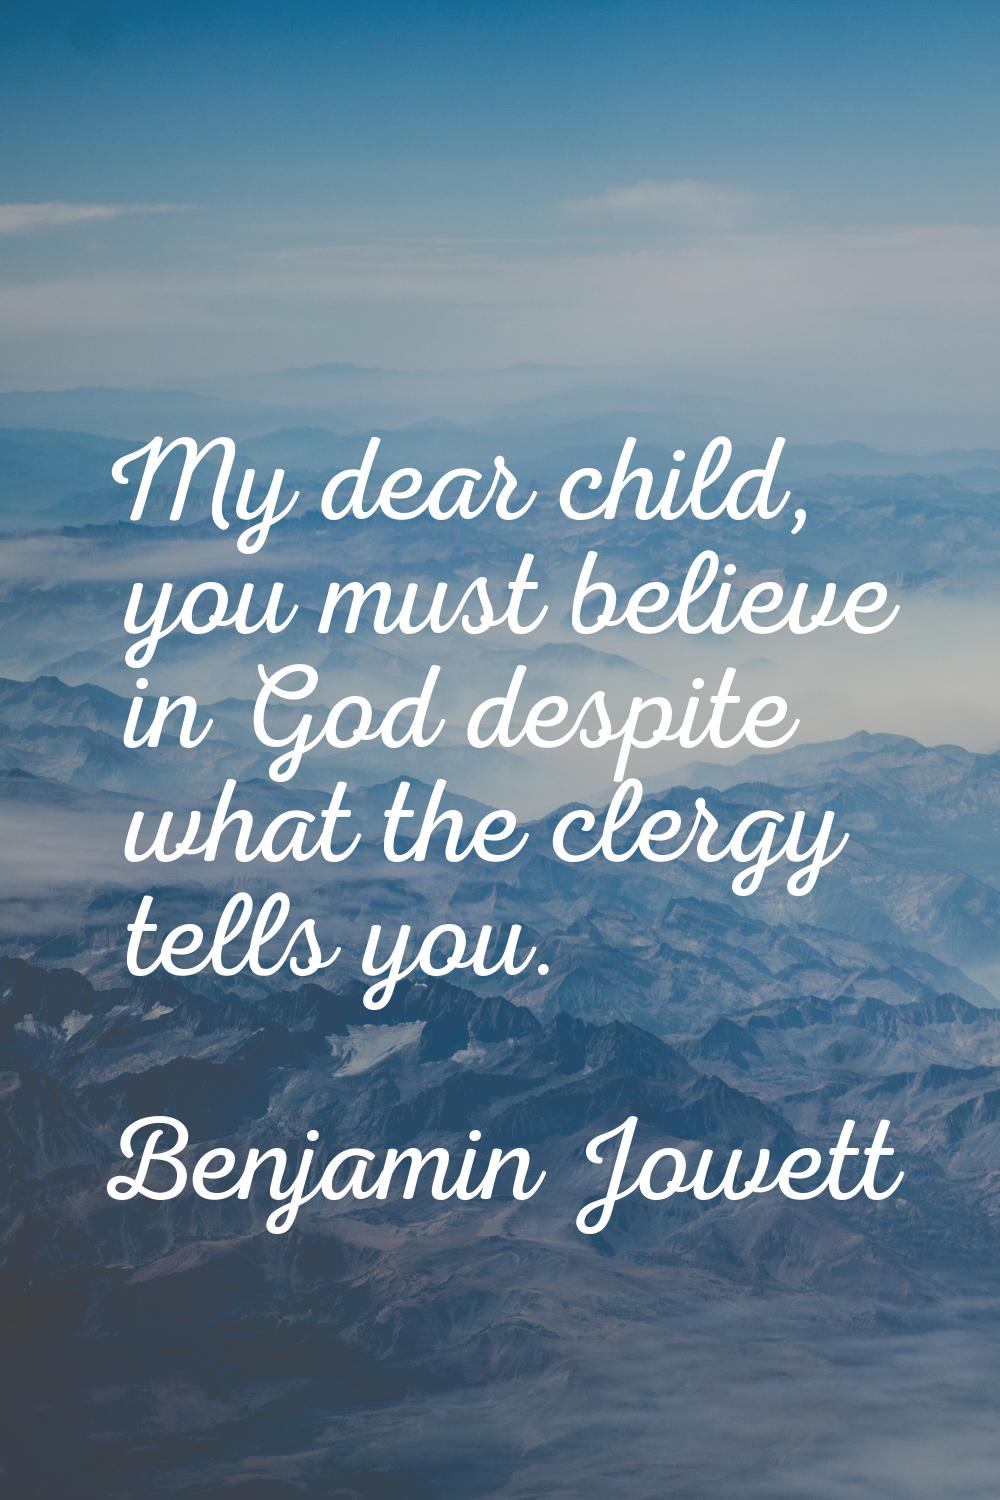 My dear child, you must believe in God despite what the clergy tells you.